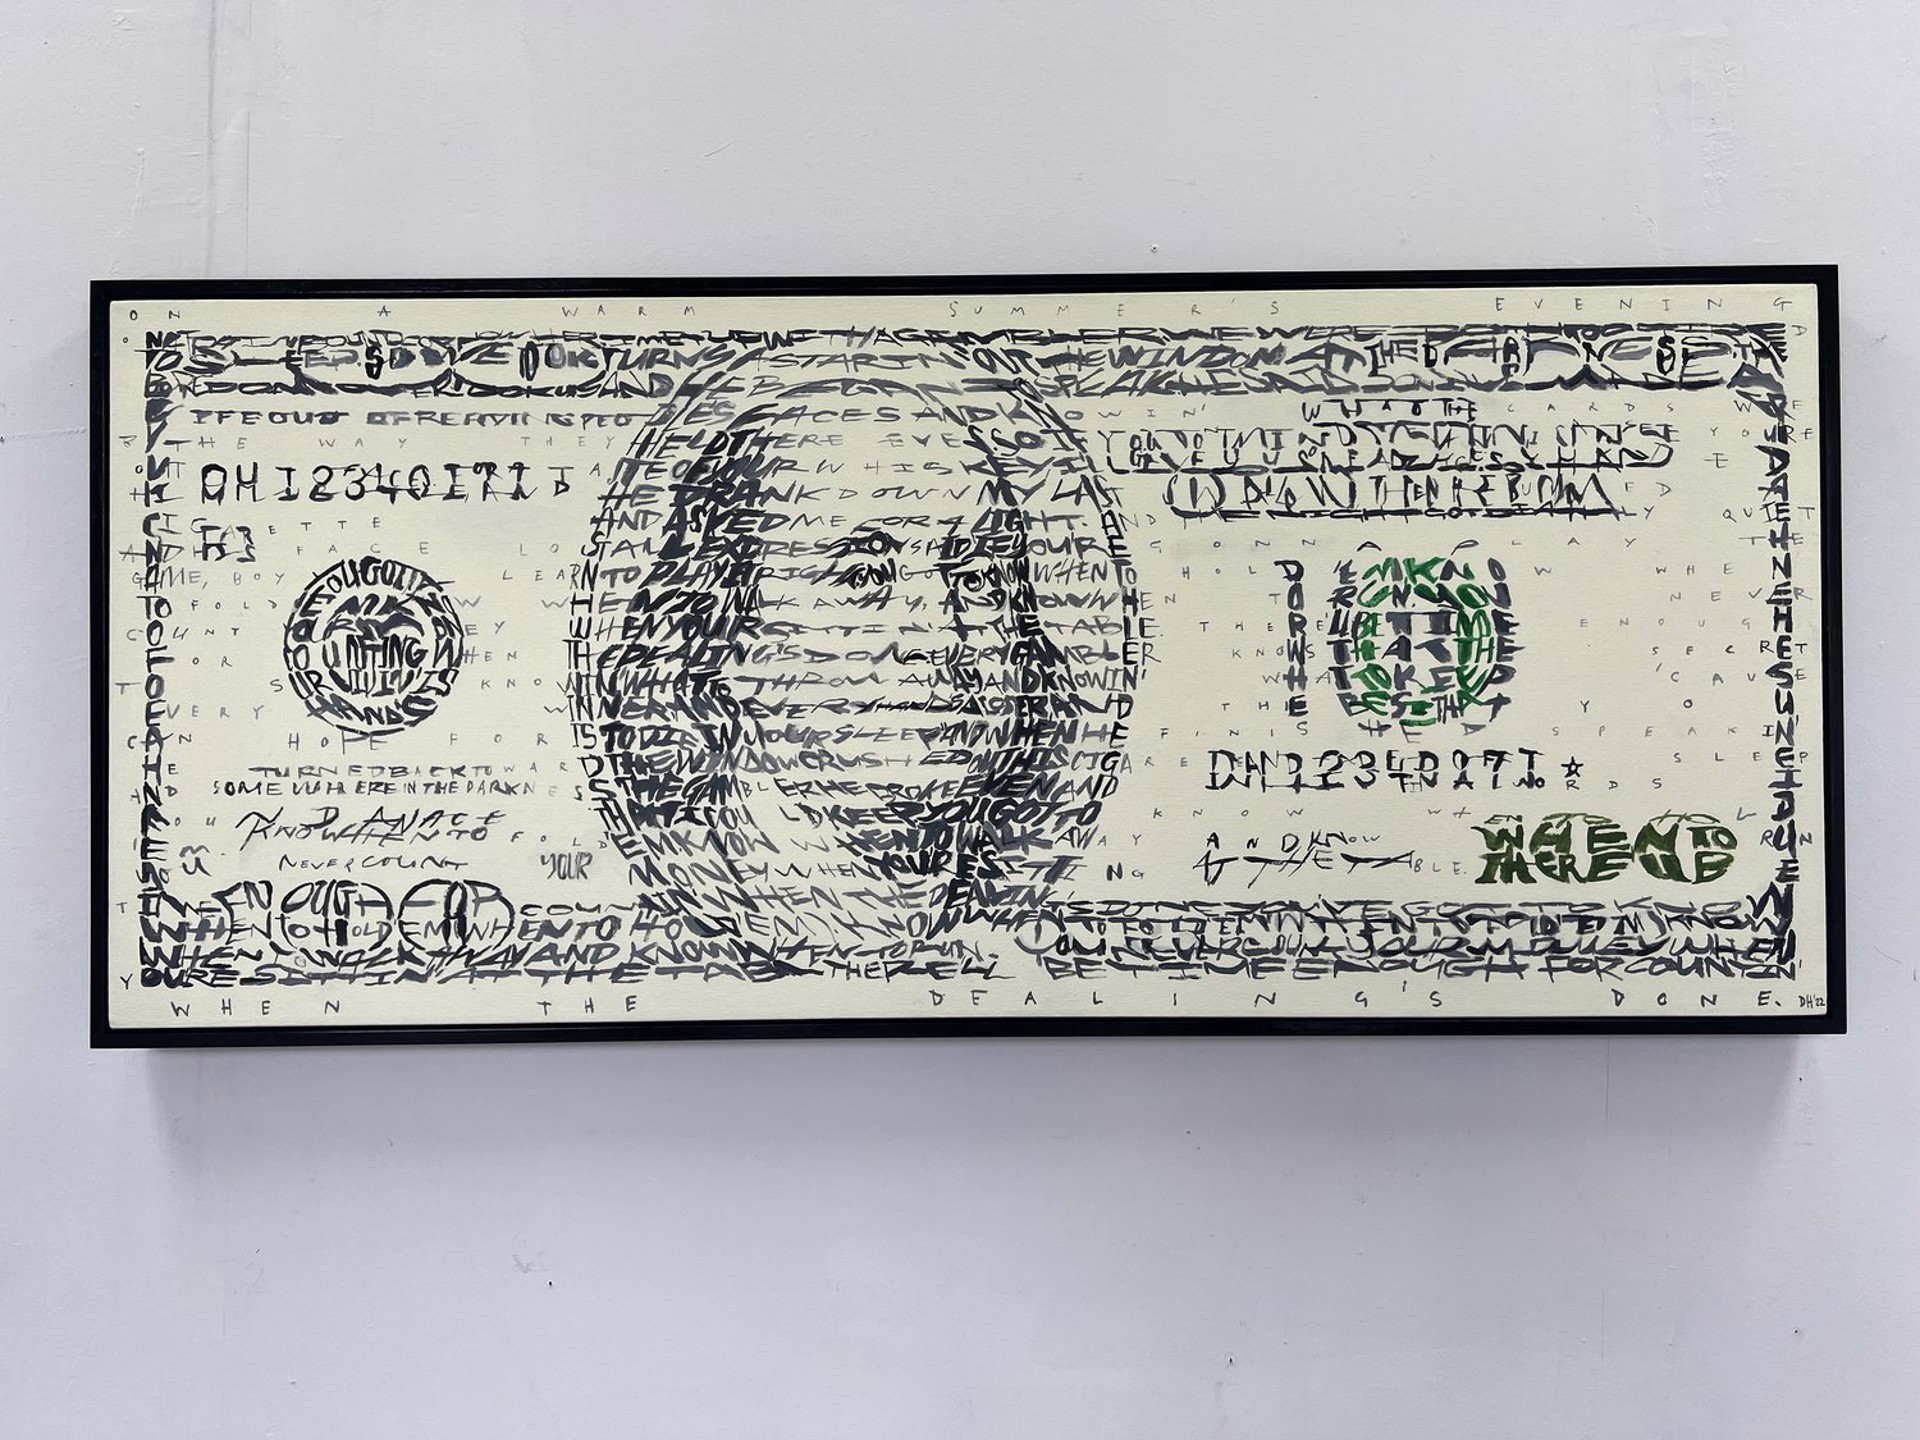 $100 Bill (Text: The Gambler by Kenny Rogers) by David Hollier